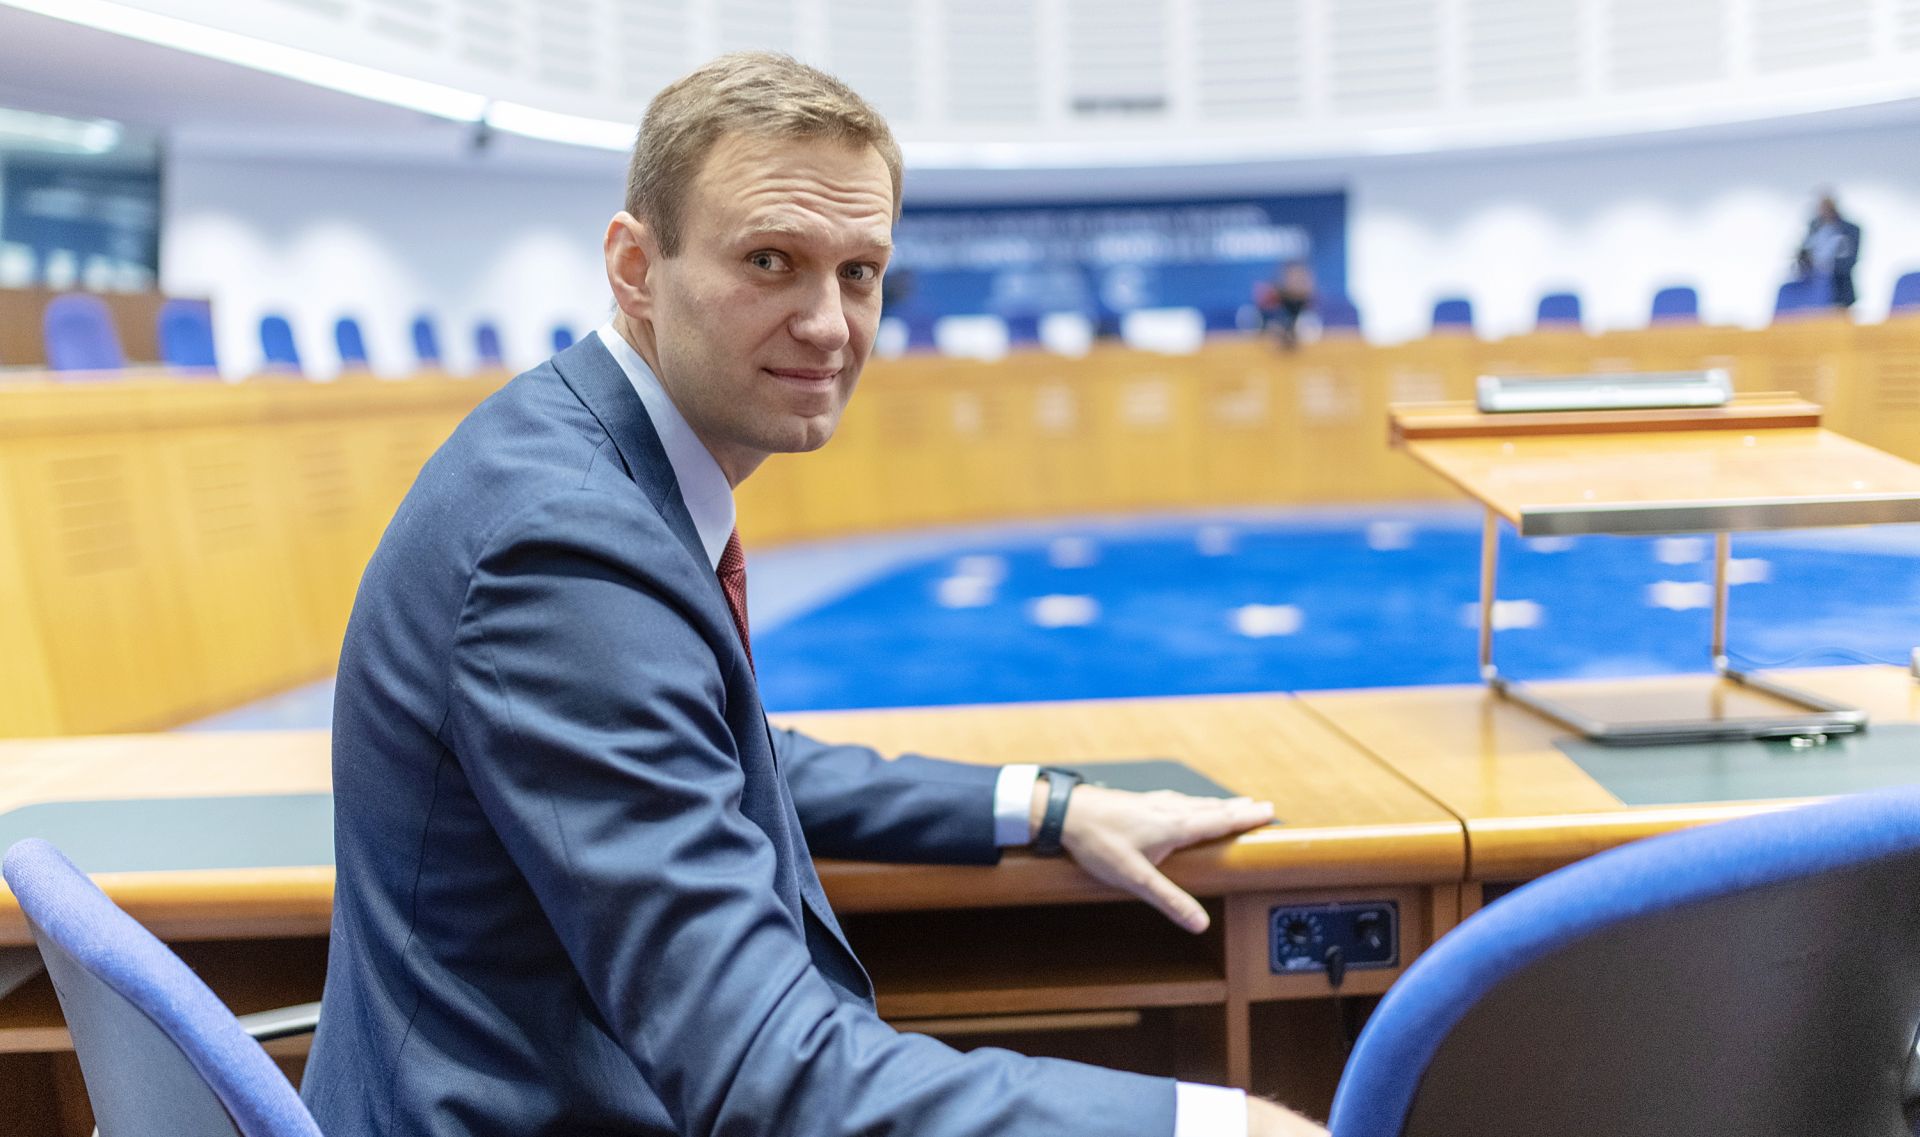 epa08613912 (FILE) - Russian opposition leader Alexei Navalny waits before a hearing for the delivery of the European Court of Human Rights (ECHR) Grand Chamber judgment regarding his case against Russia at the court in Strasbourg, France, 15 November 2018 (reissued 20 August 2020). Navalny’s spokeswoman Kira Yarmysh said on social media on 20 August that the opposition leader and staunch critic of President Vladimir Putin was taken to hospital for alleged poisoning after he started feeling unwell during a flight from Siberia to Moscow. The plane made an emergency landing in the city of Omsk.  EPA/PATRICK SEEGER